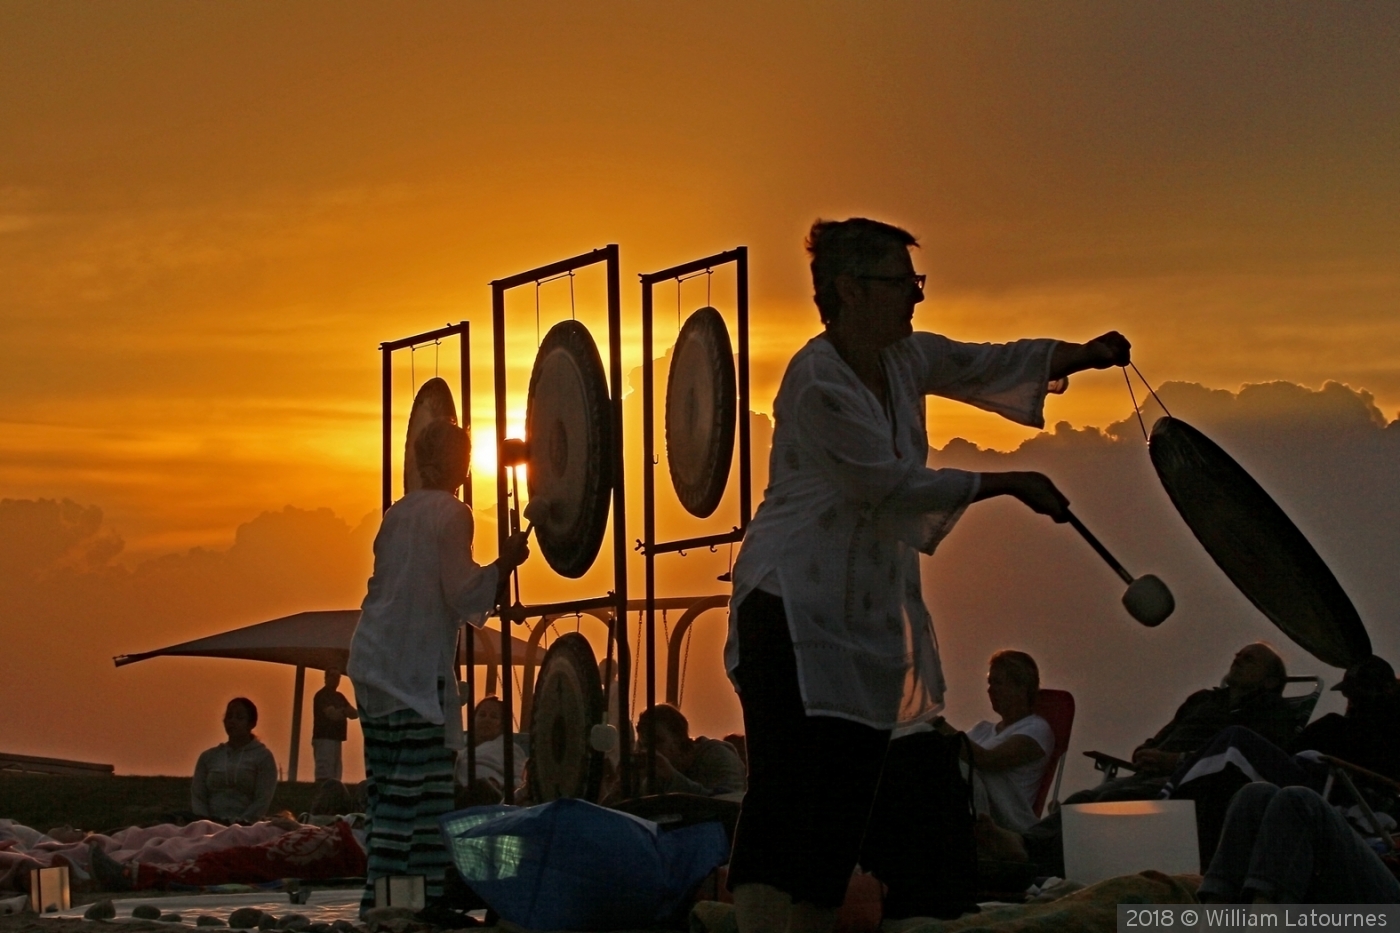 Gong Yogo On The Beach At Sunset by William Latournes